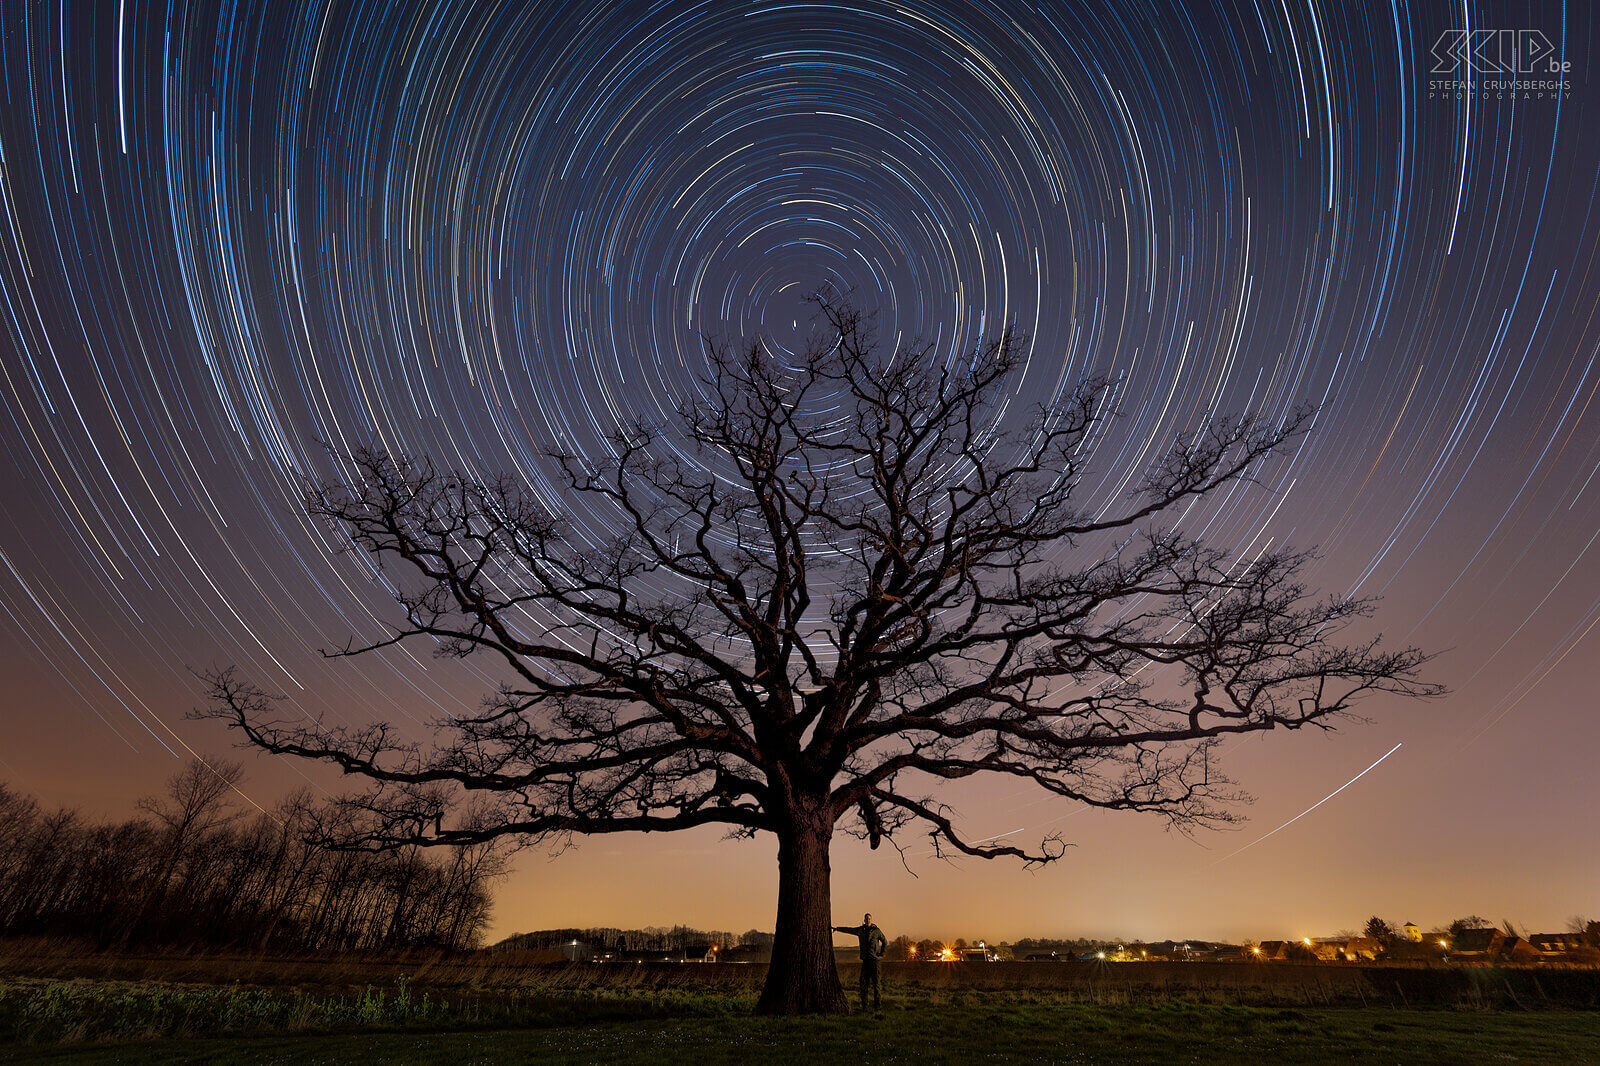 Hageland by night - Old oak of Kaggevinne with star trails A selfie with star trails at the old oak of Kaggevinne near my home in Scherpenheuvel-Zichem. This image was created by merging 240 images, each with an exposure of 30 seconds.  Stefan Cruysberghs